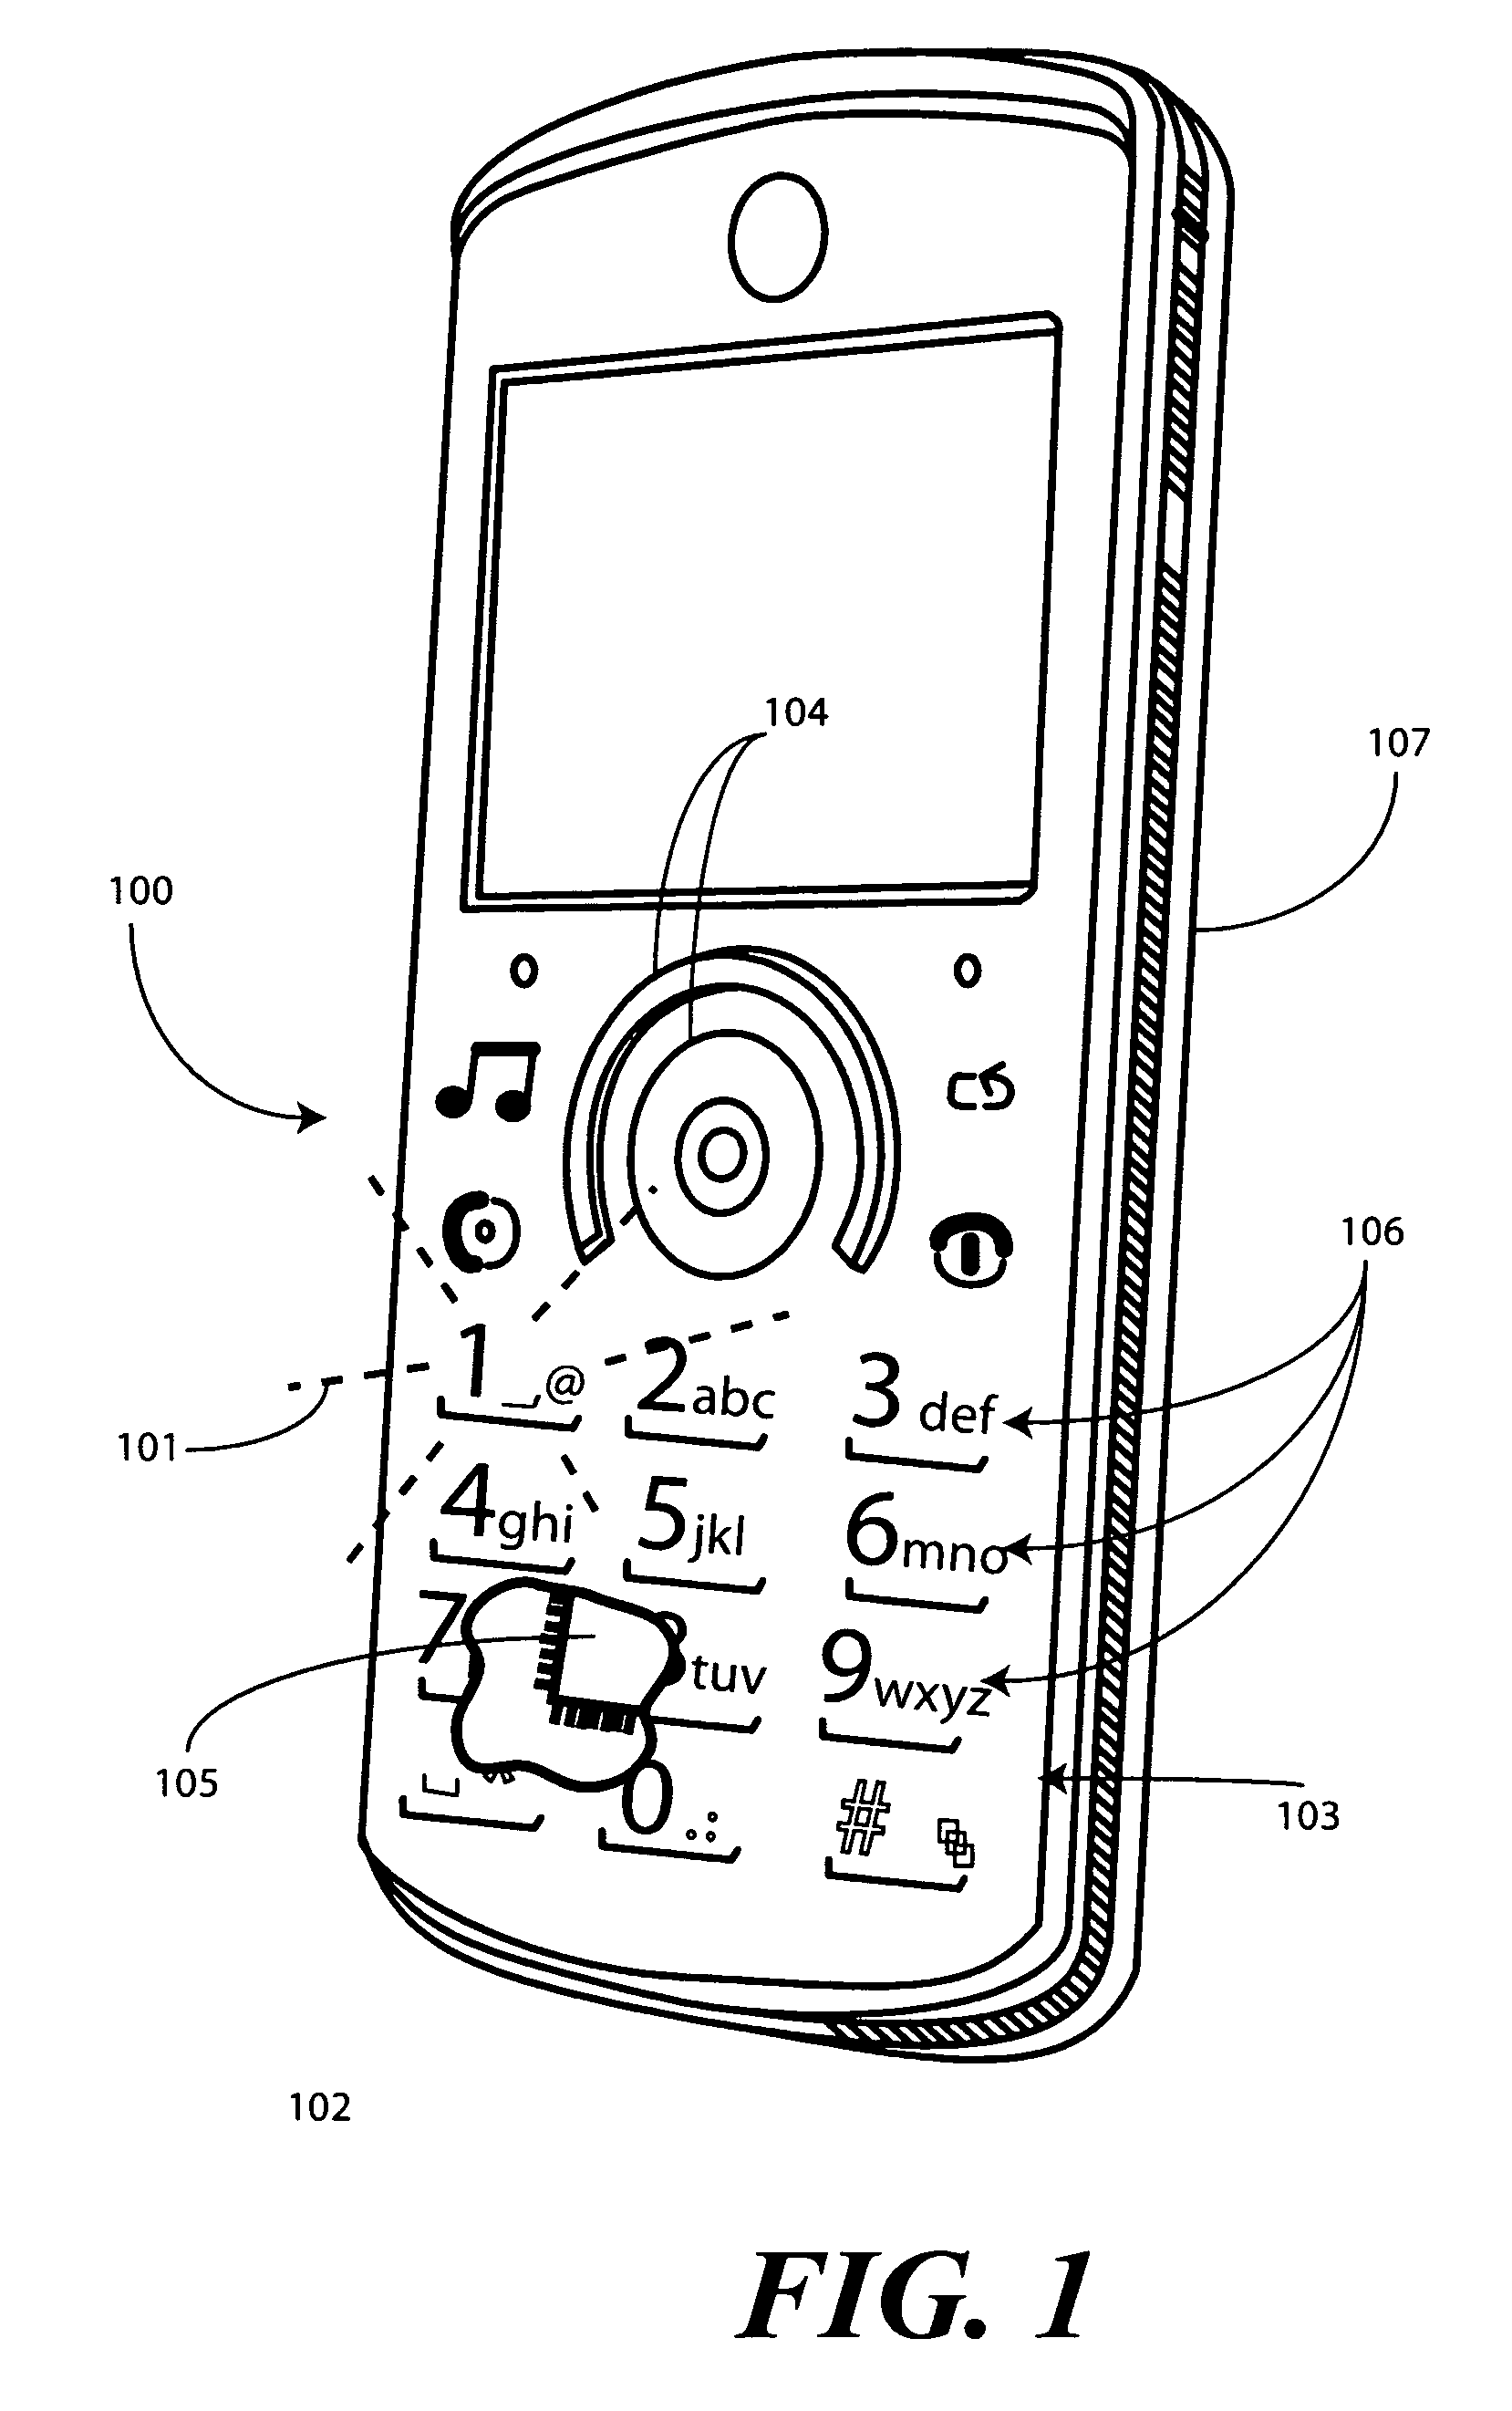 Electronic device with suspension interface for localized haptic response